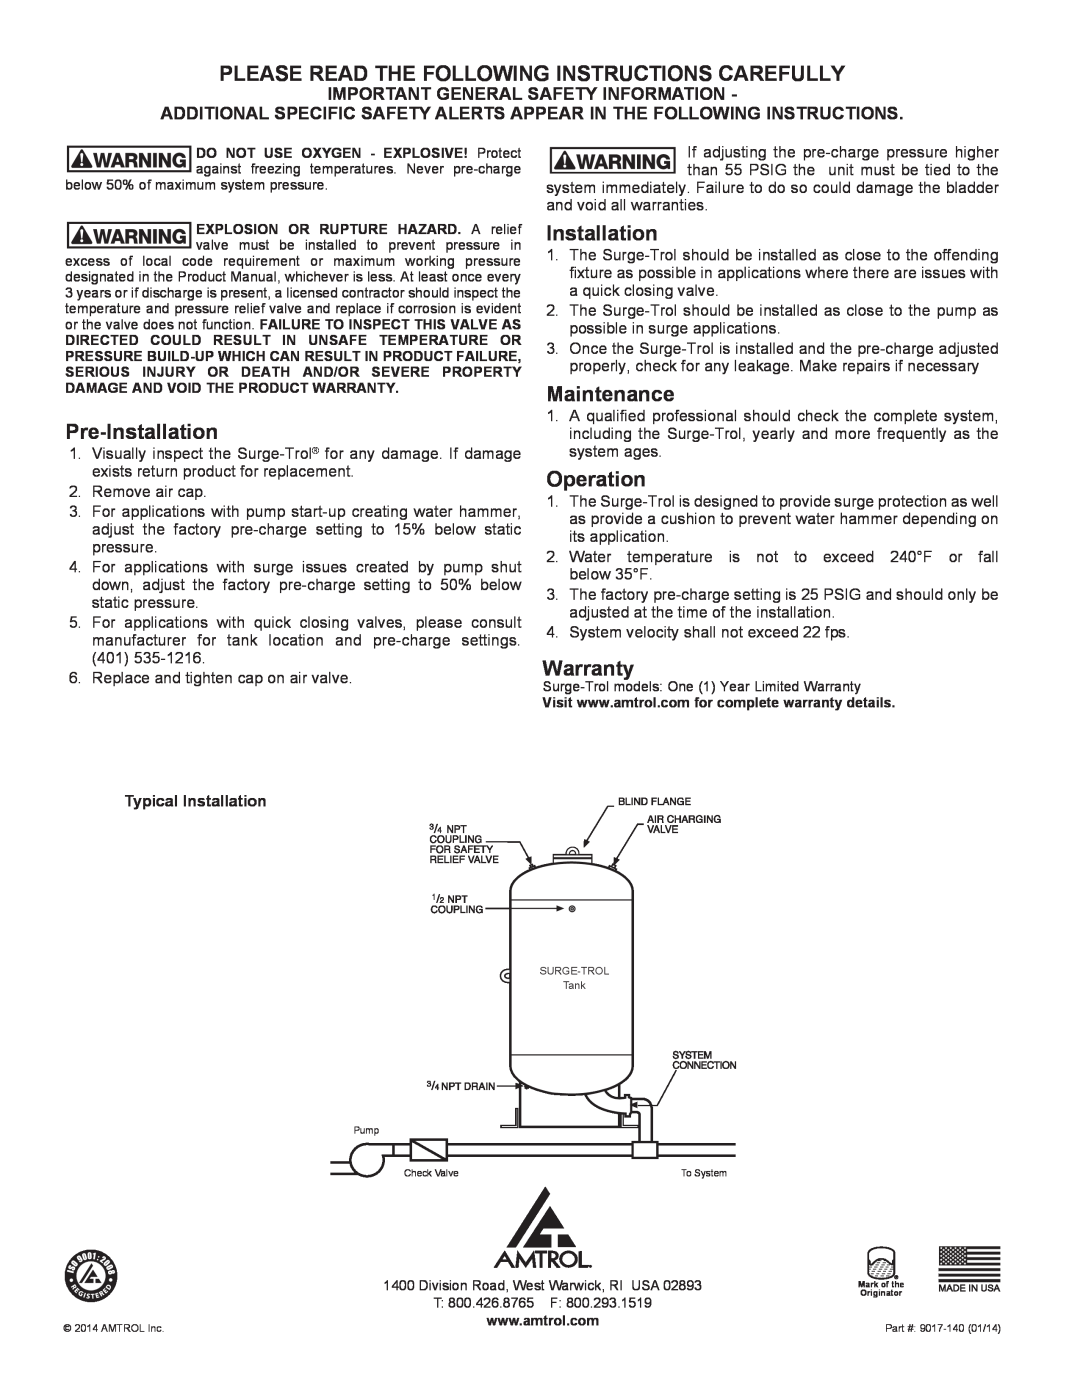 Amtrol SPT-70 Typical Installation, Please Read The Following Instructions Carefully, Pre-Installation, Maintenance 